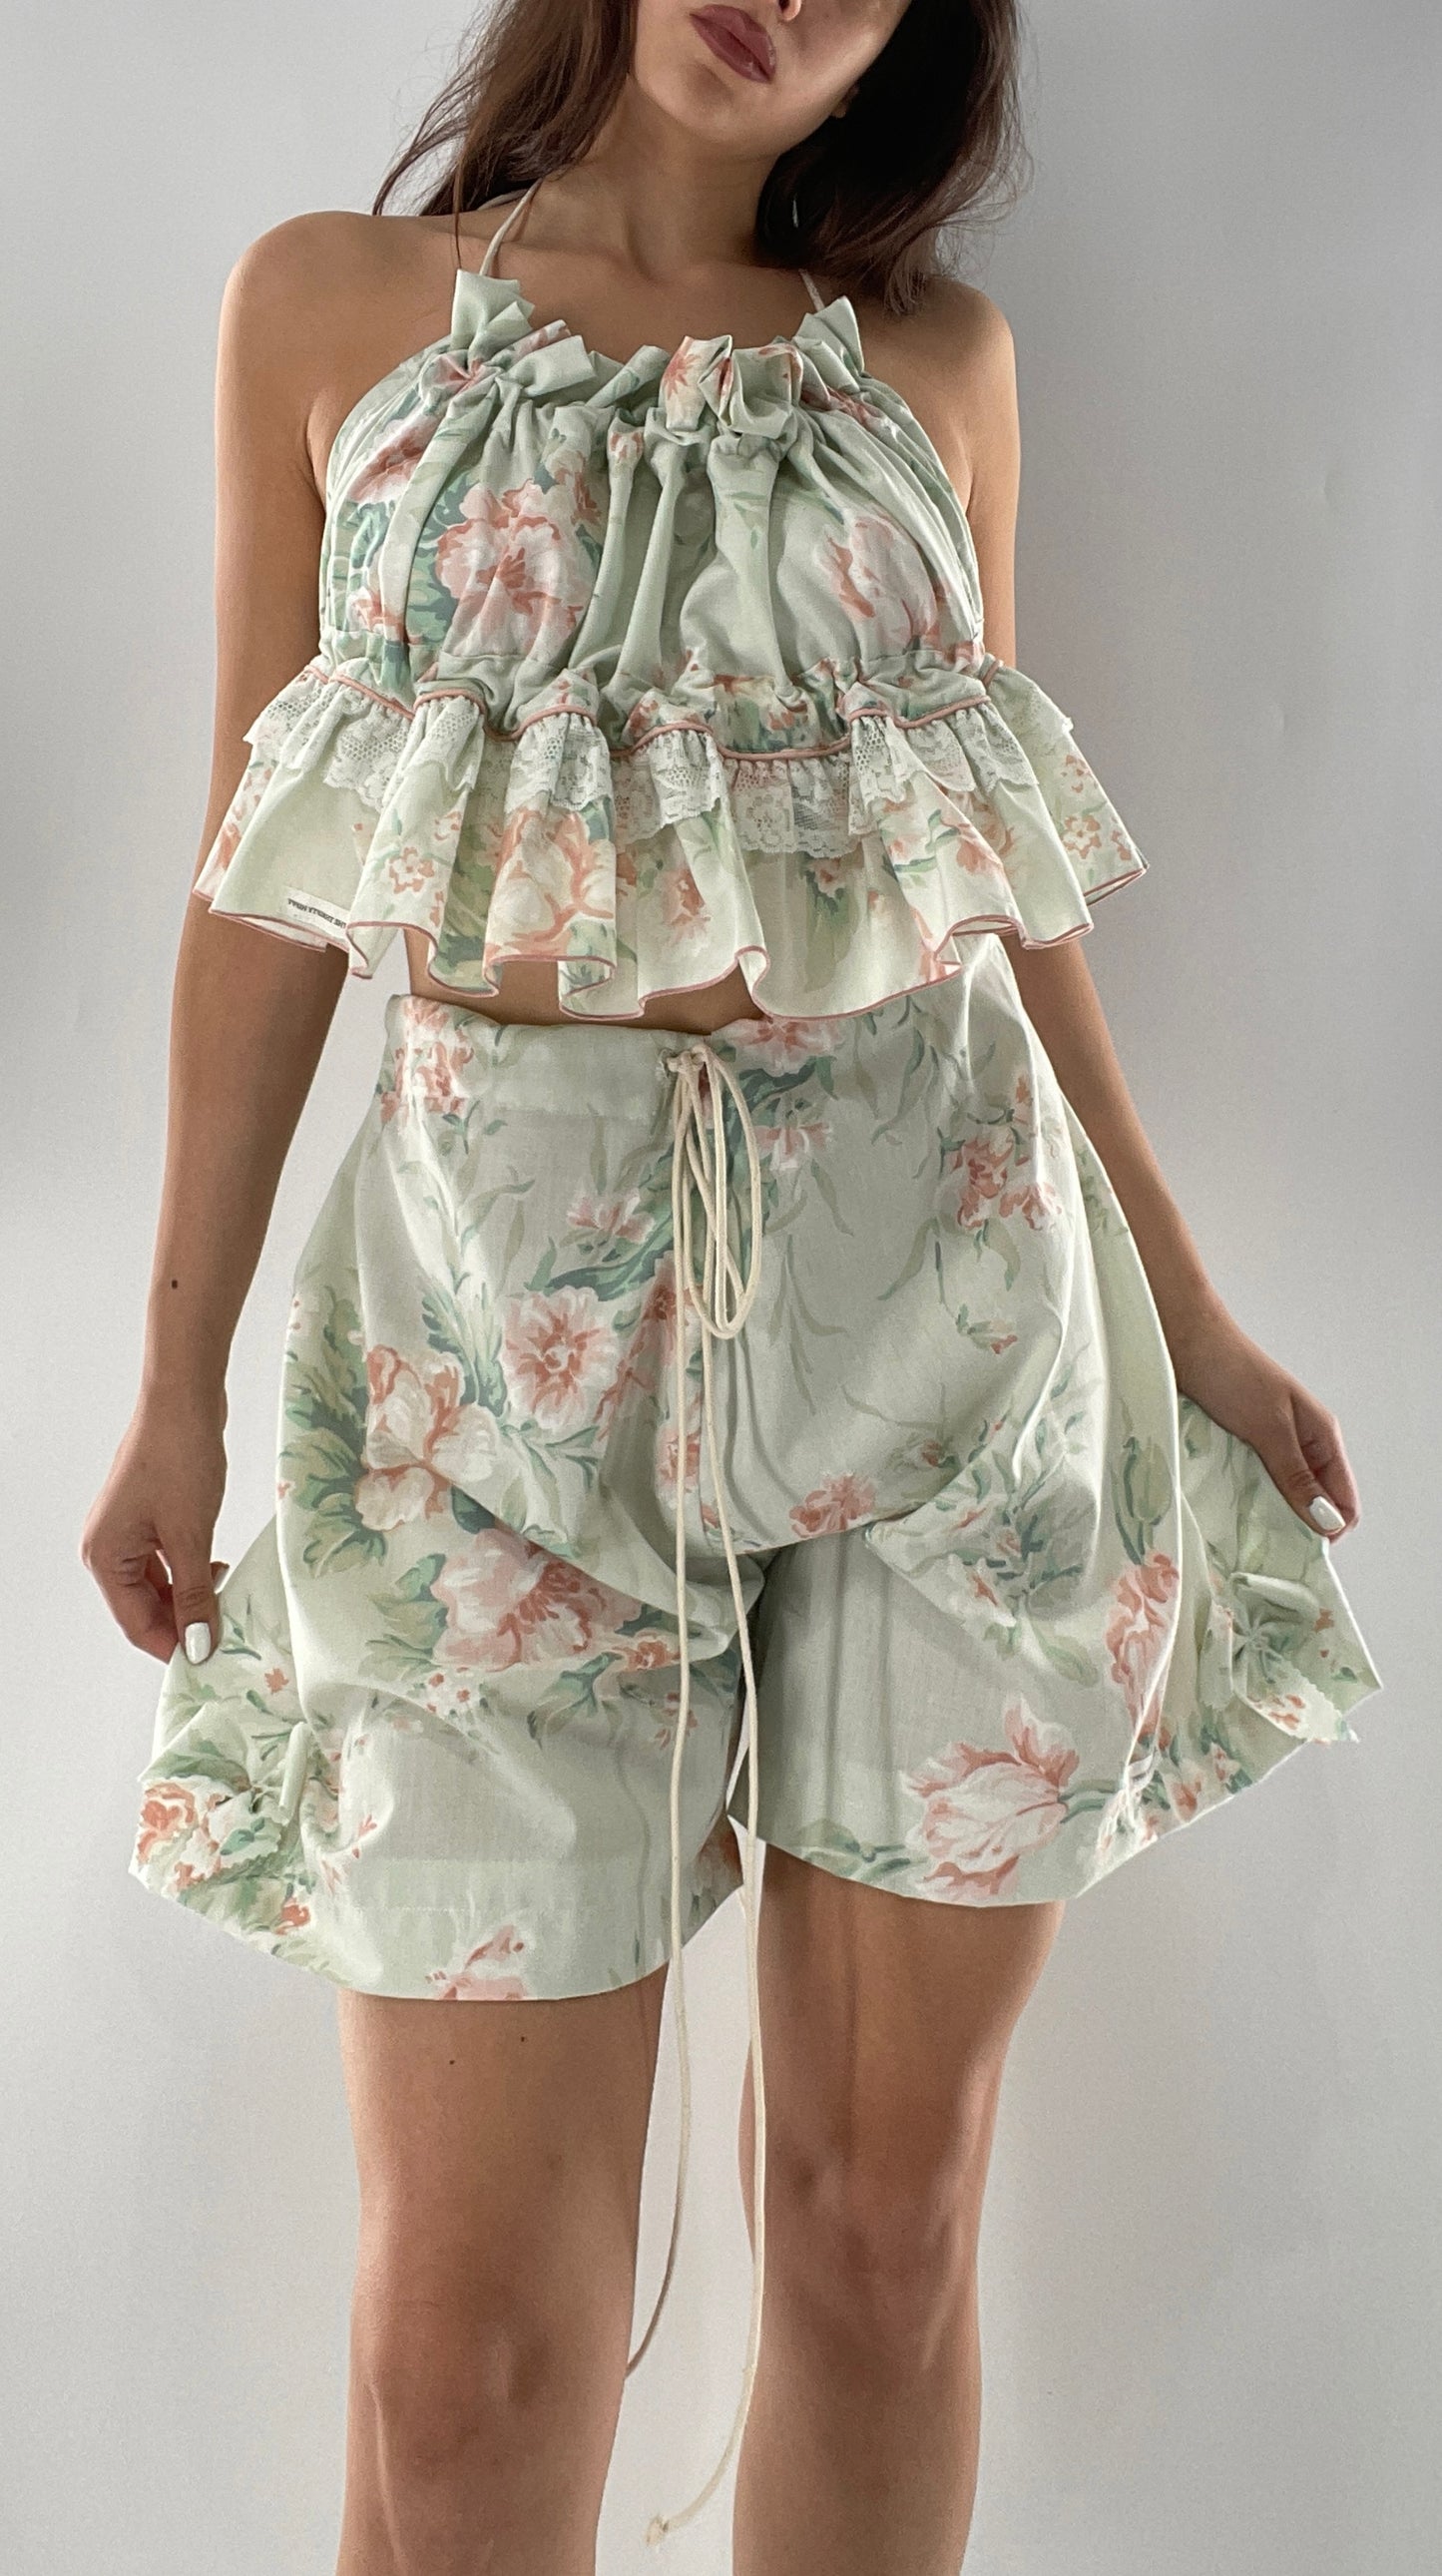 Vintage 2 Piece Bloomers and Babydoll Blouse Set Covered in Delicate Florals, Ruffles, Bows and Lace (One Size)